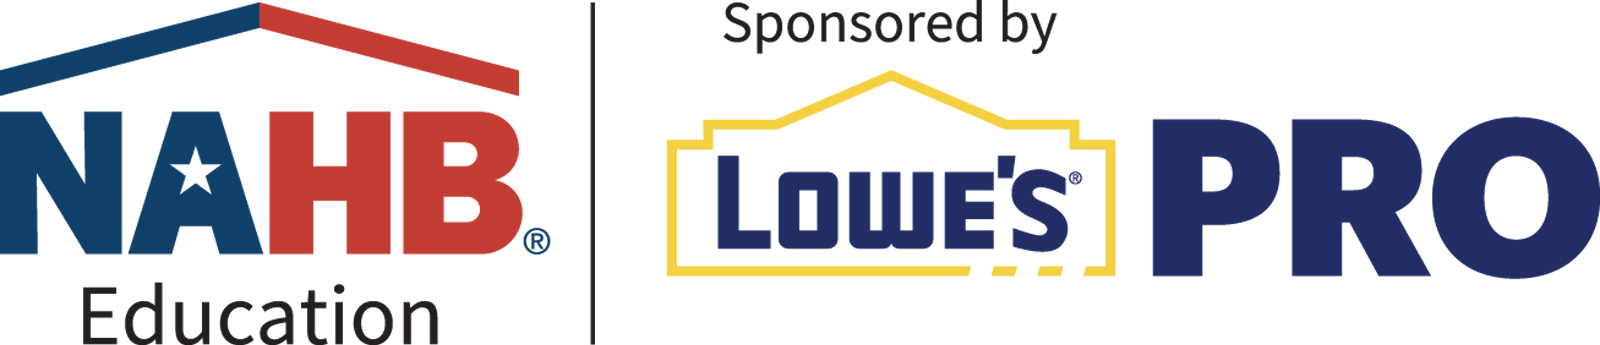 Sponsored by NAHB and Lowes 4 Pros